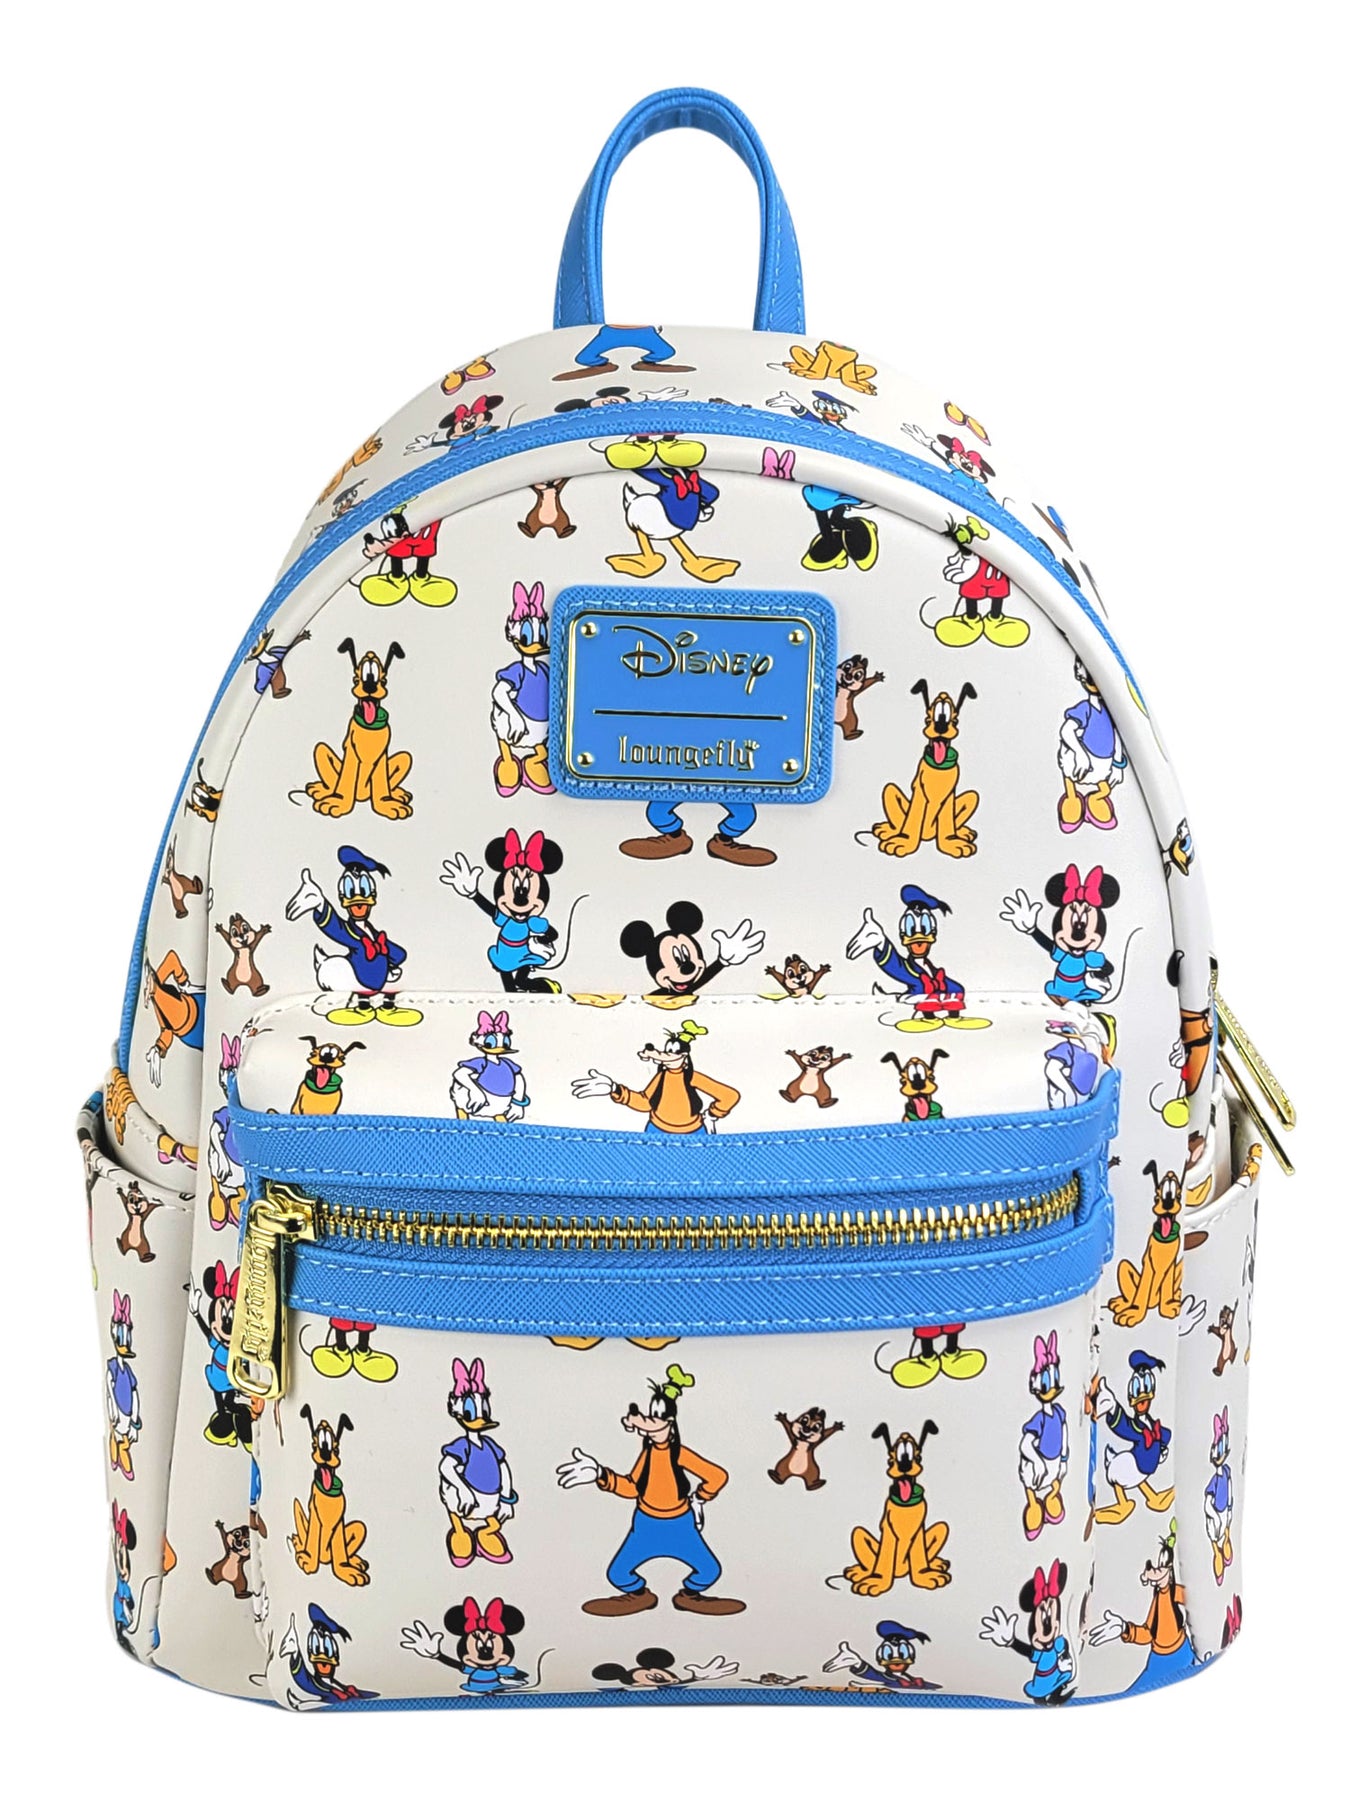 Disney Backpack Bag - Mickey Mouse Sketches - Gray & Black